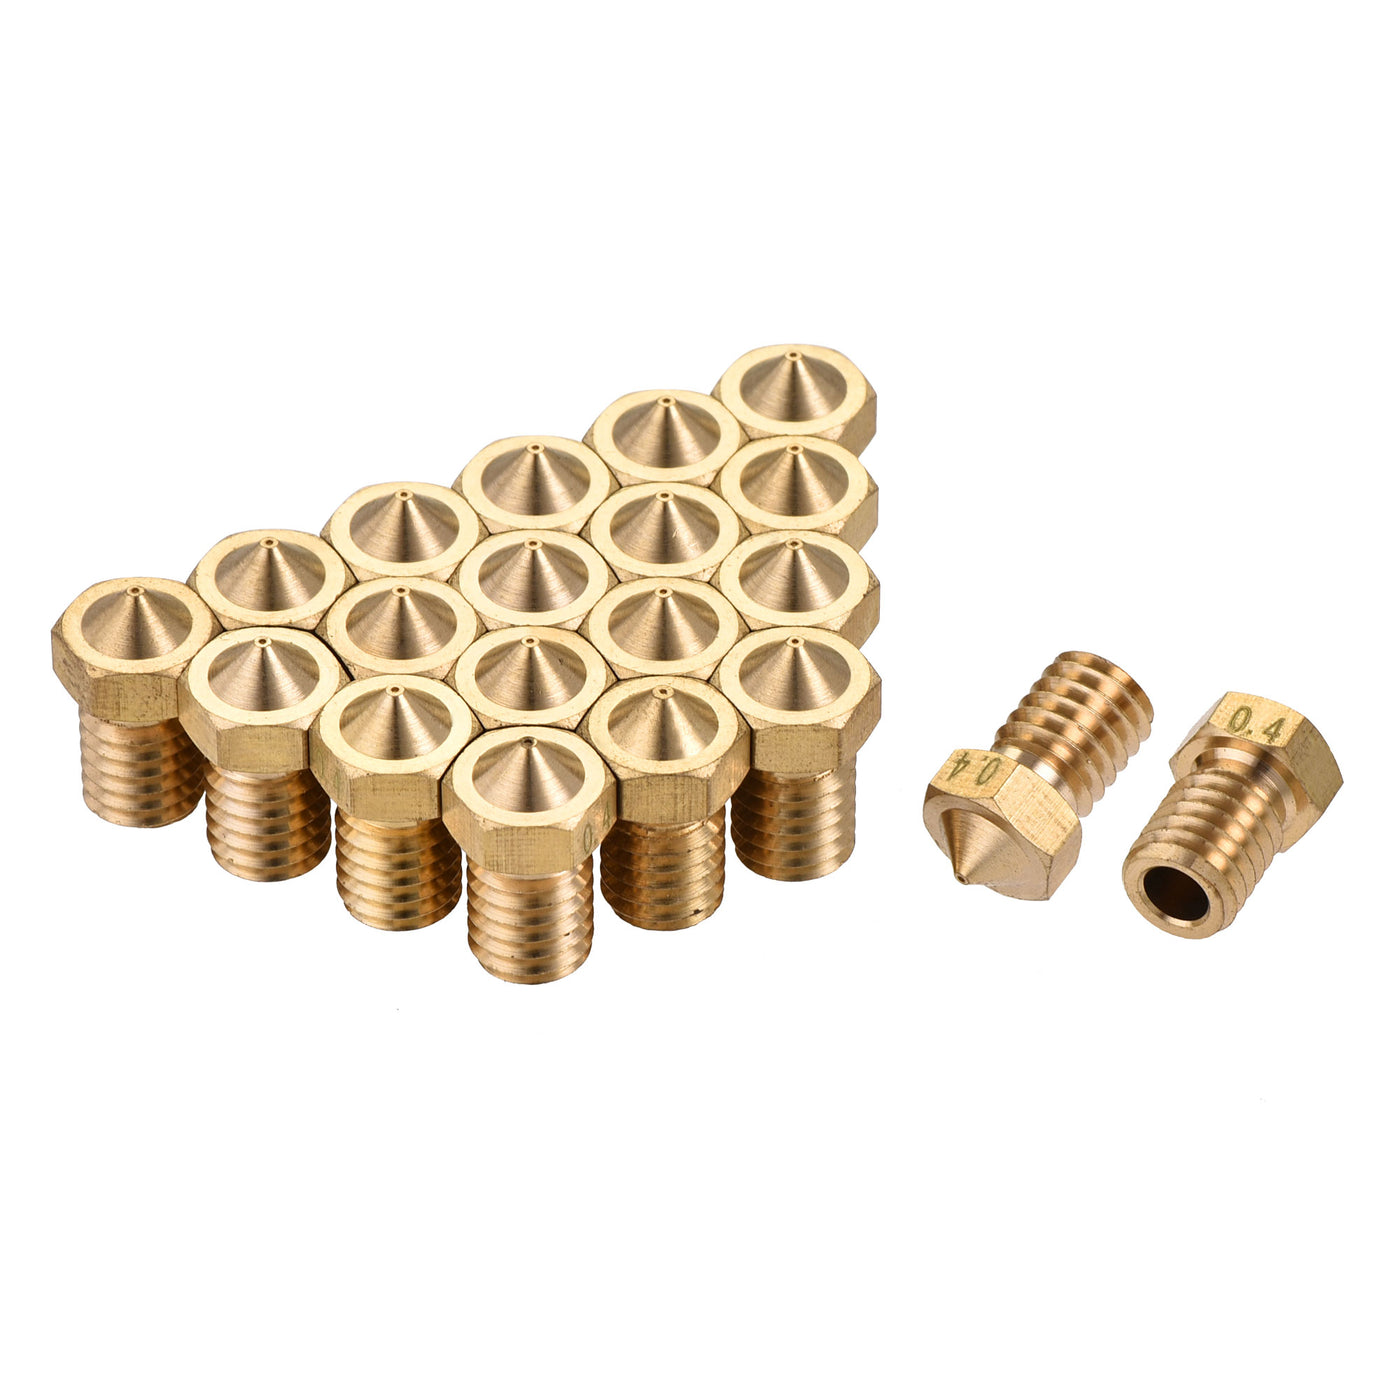 uxcell Uxcell 0.4mm 3D Printer Nozzle, 20pcs M6 Thread for V5 V6 3mm Extruder Print, Brass